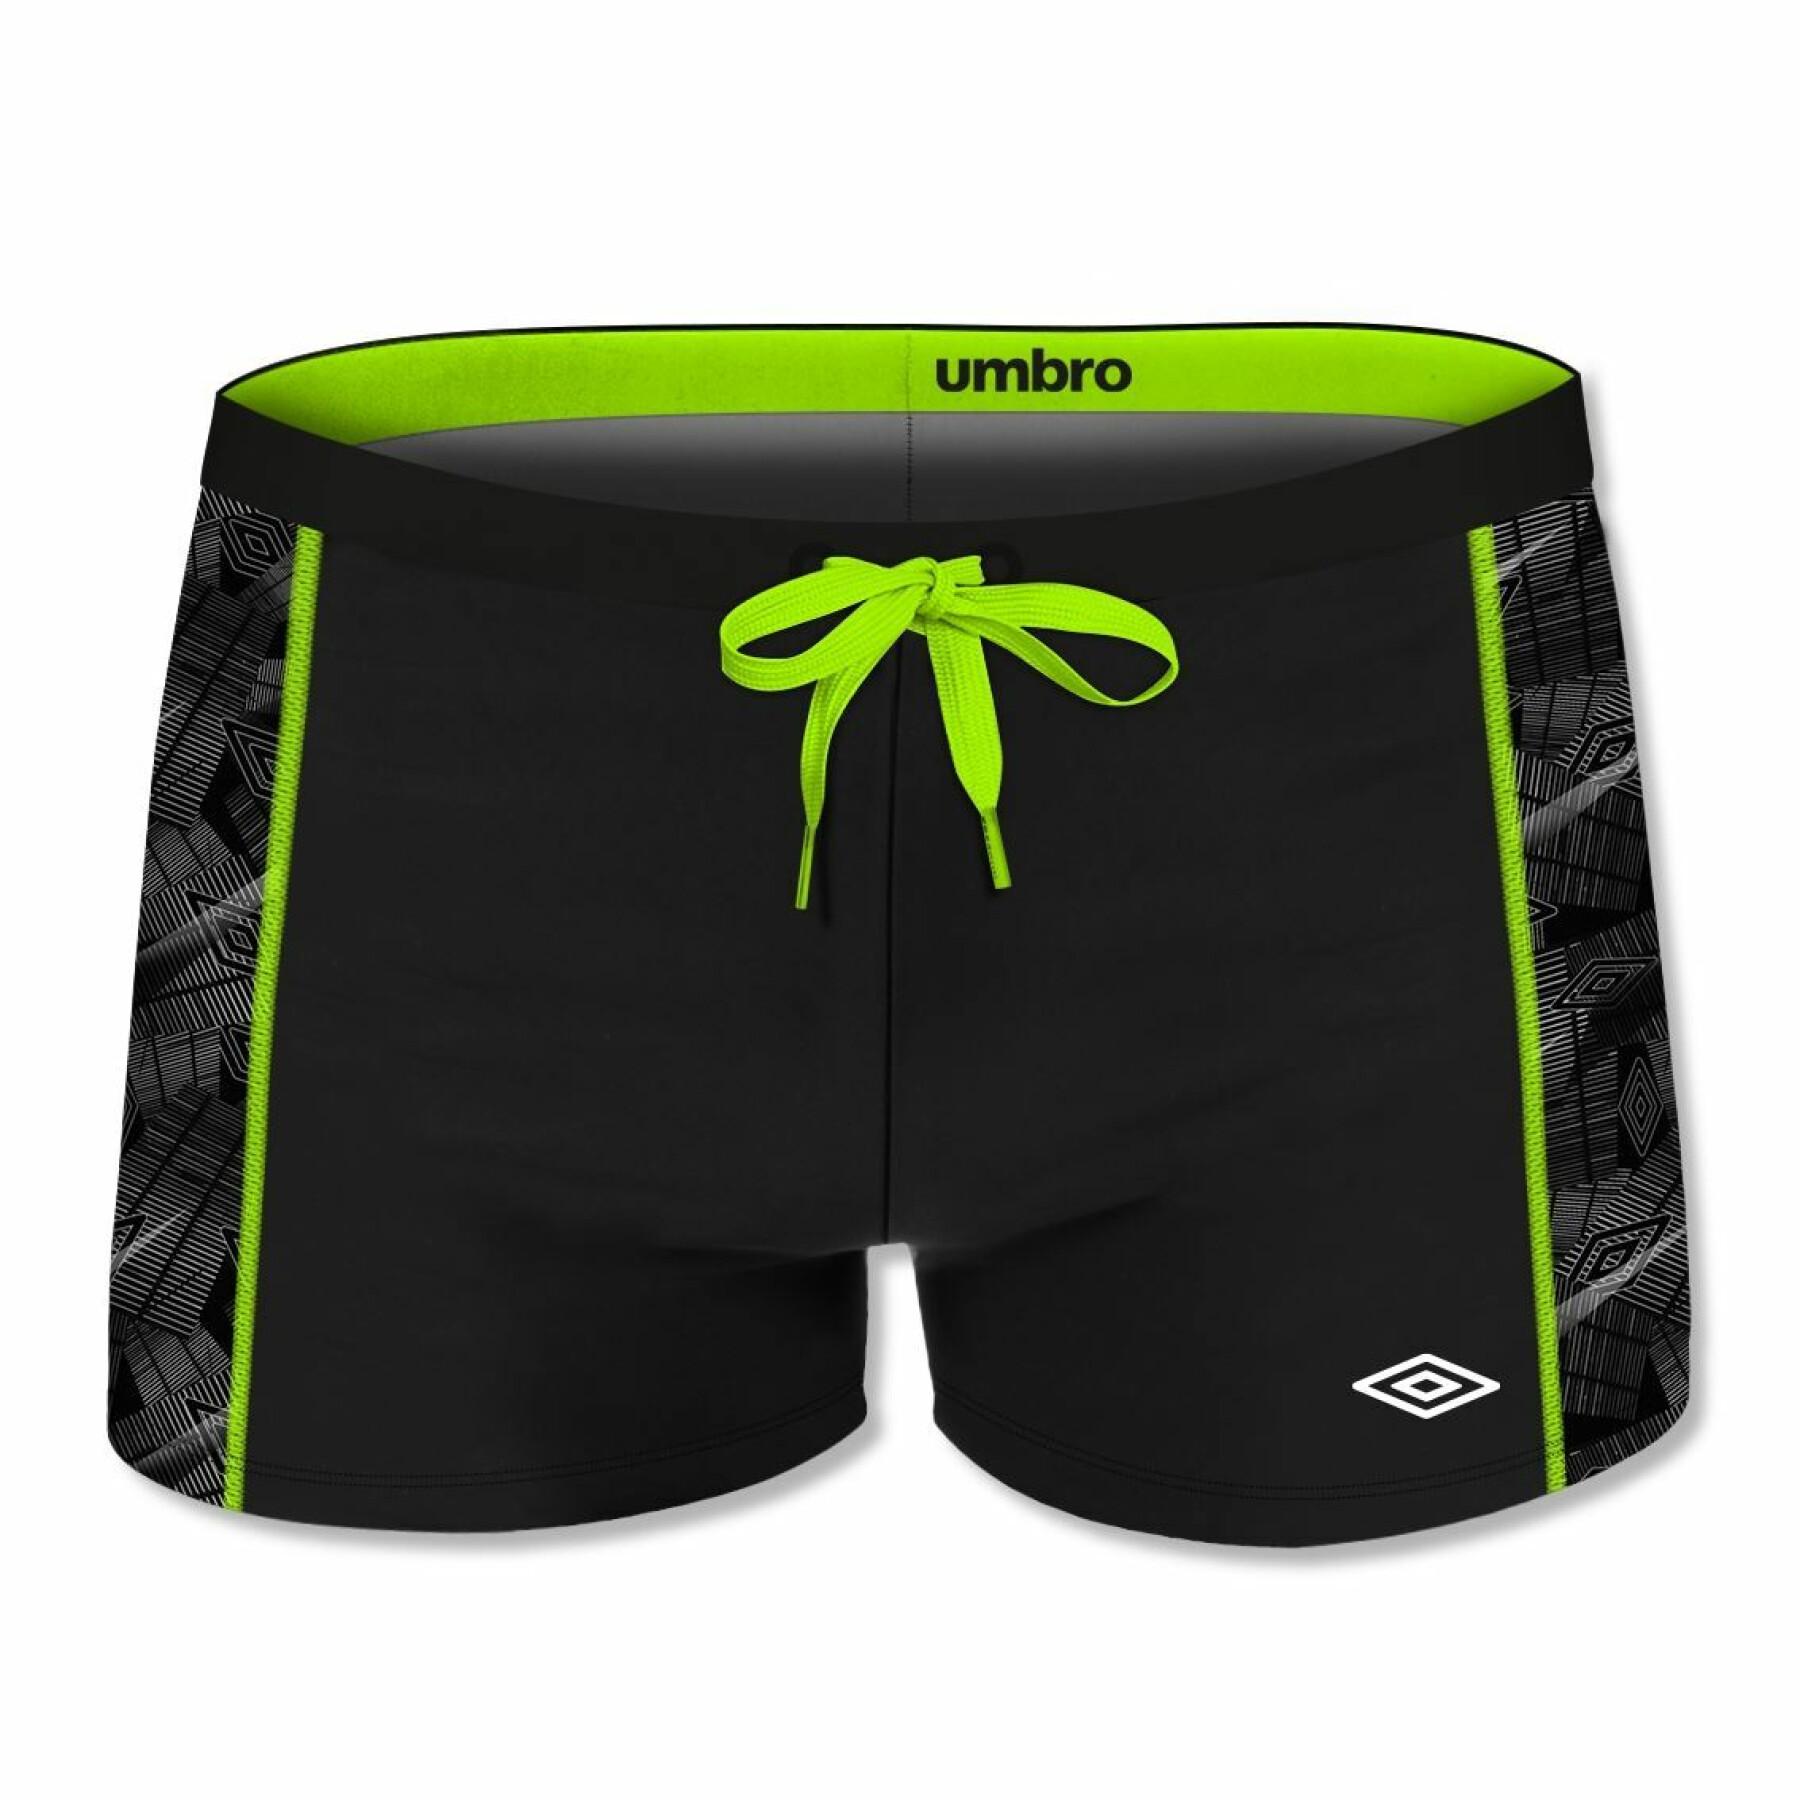 Bathing trunks with colored stitching Umbro